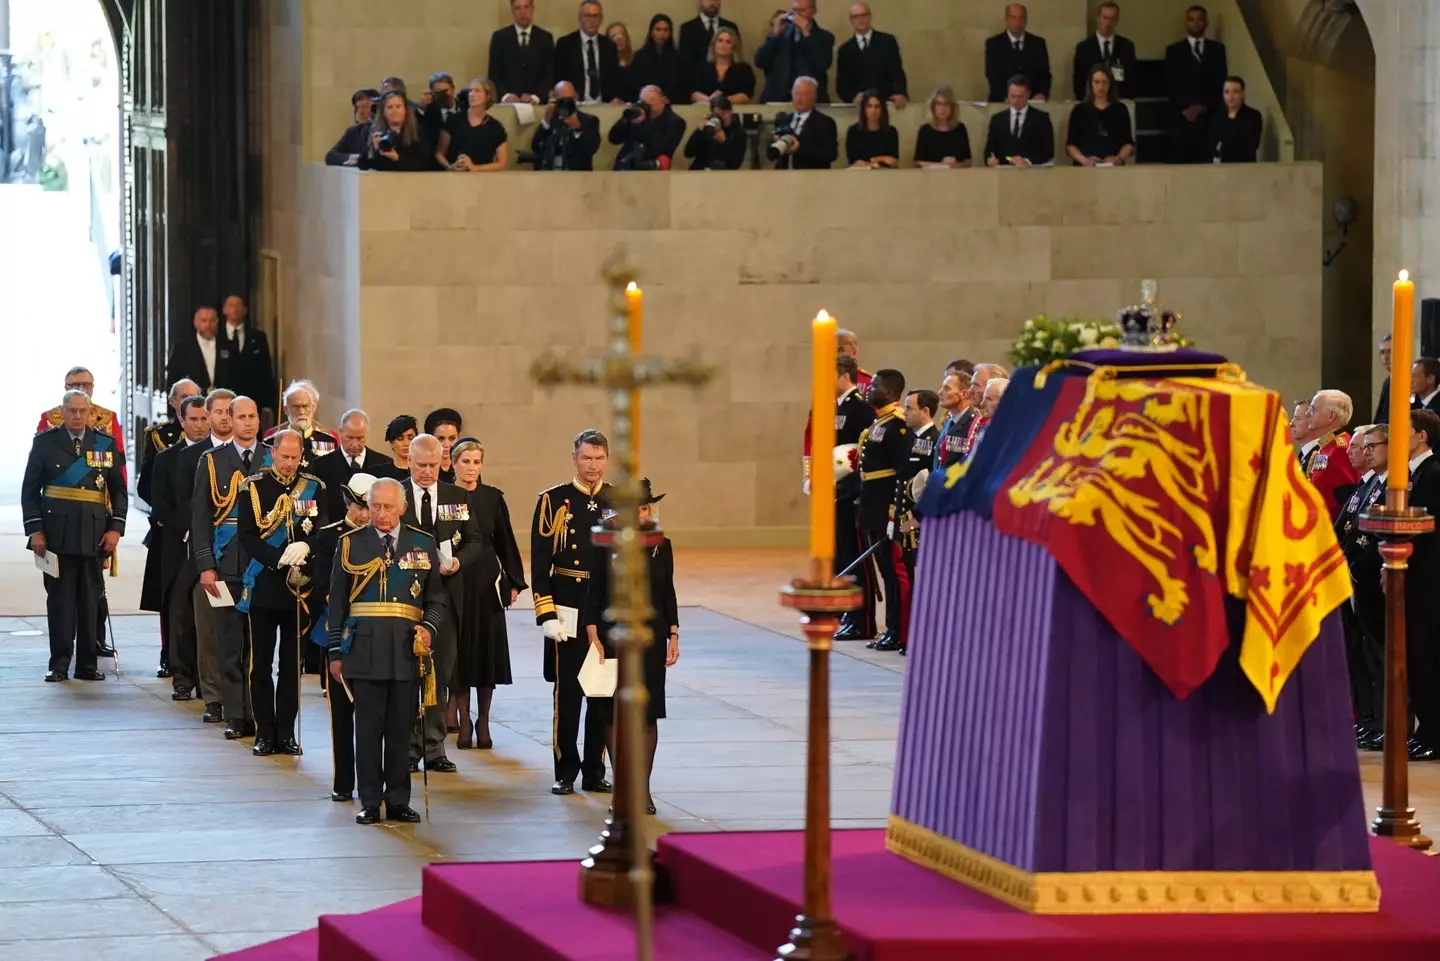 King Charles III, his sons, and his siblings followed the casket into the hall.